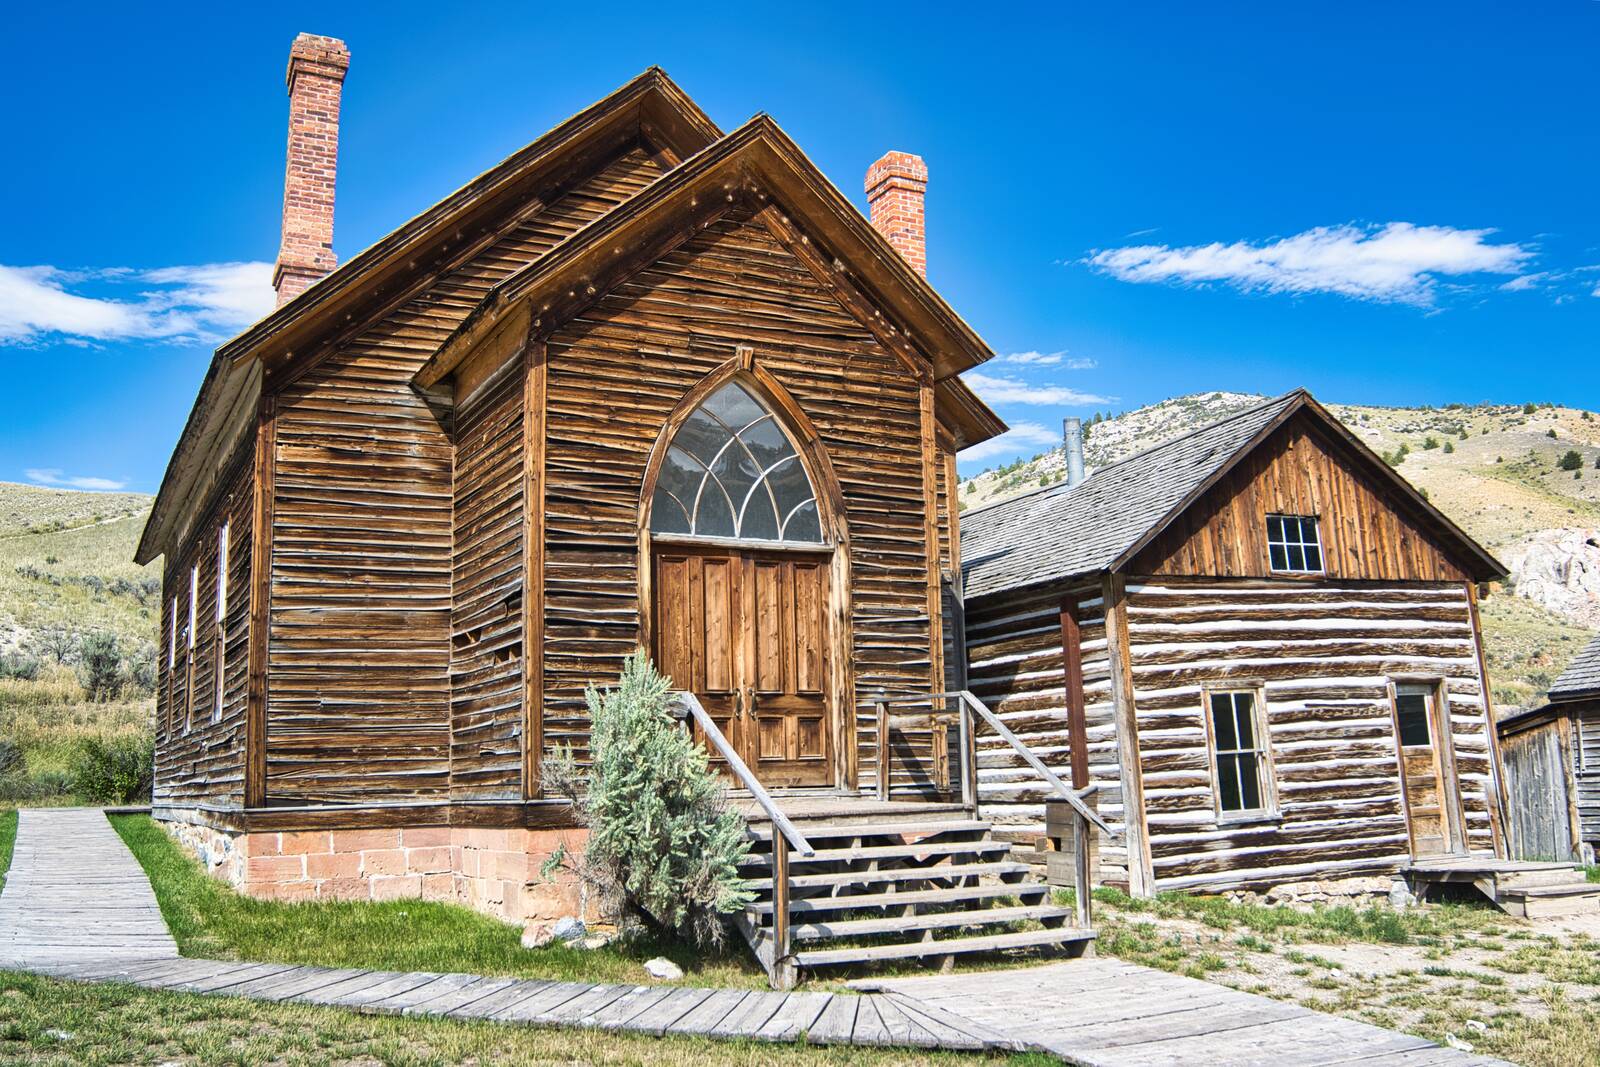 Image of Bannack, Montana Ghost Town by Steve West